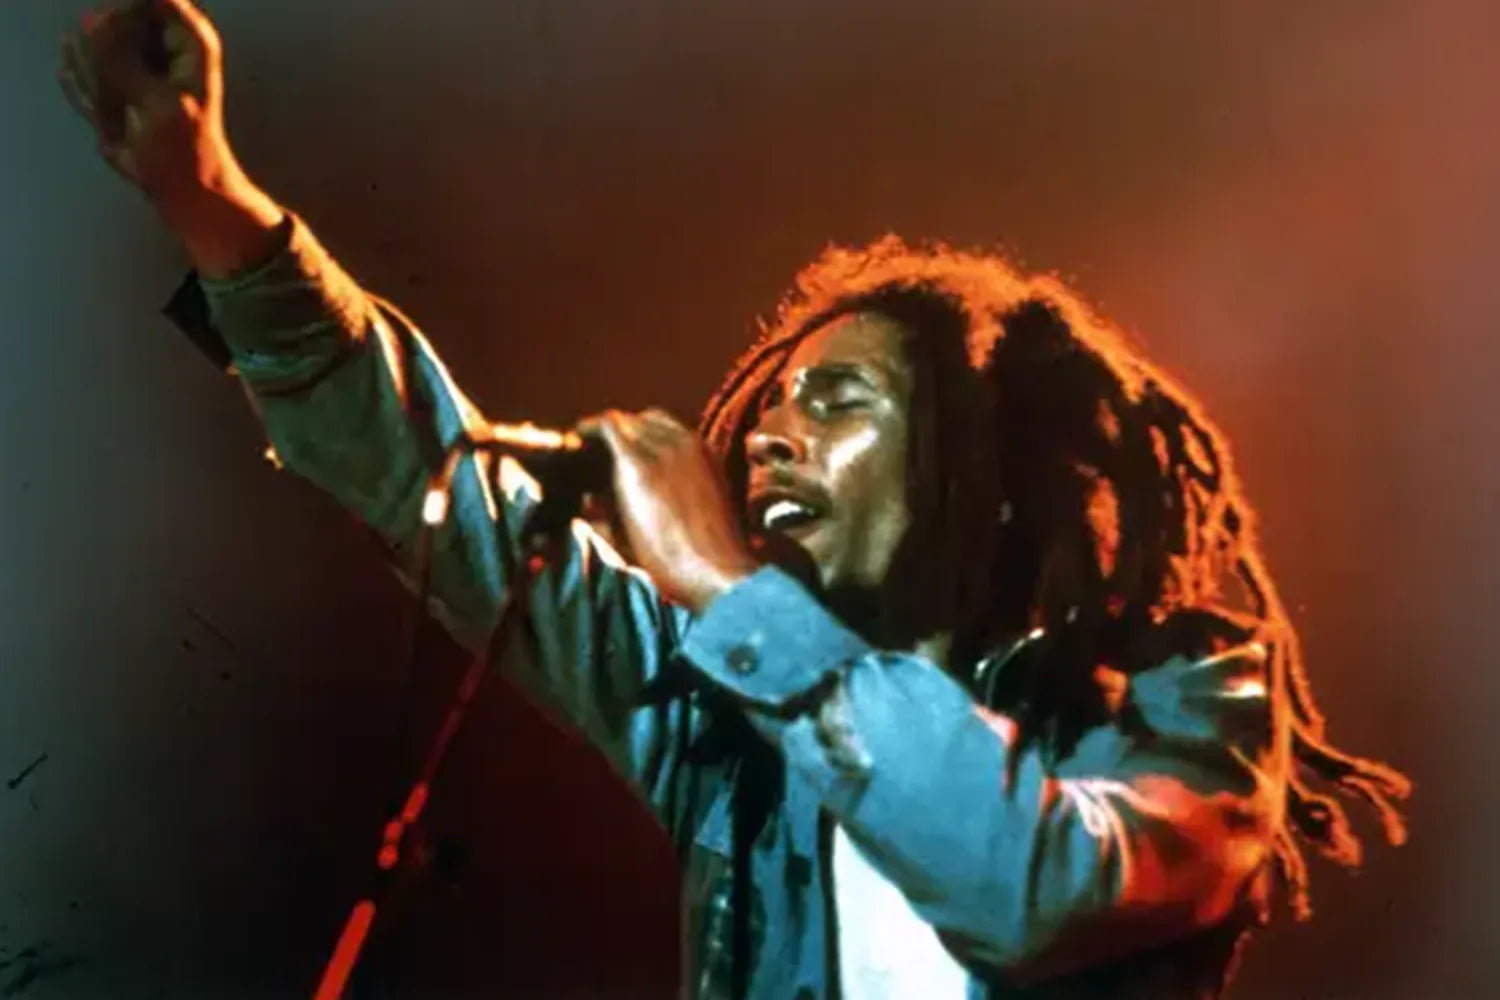 Reggae star Bob Marley performing on stage holding a microphone, wearing a sleek blue jacket.